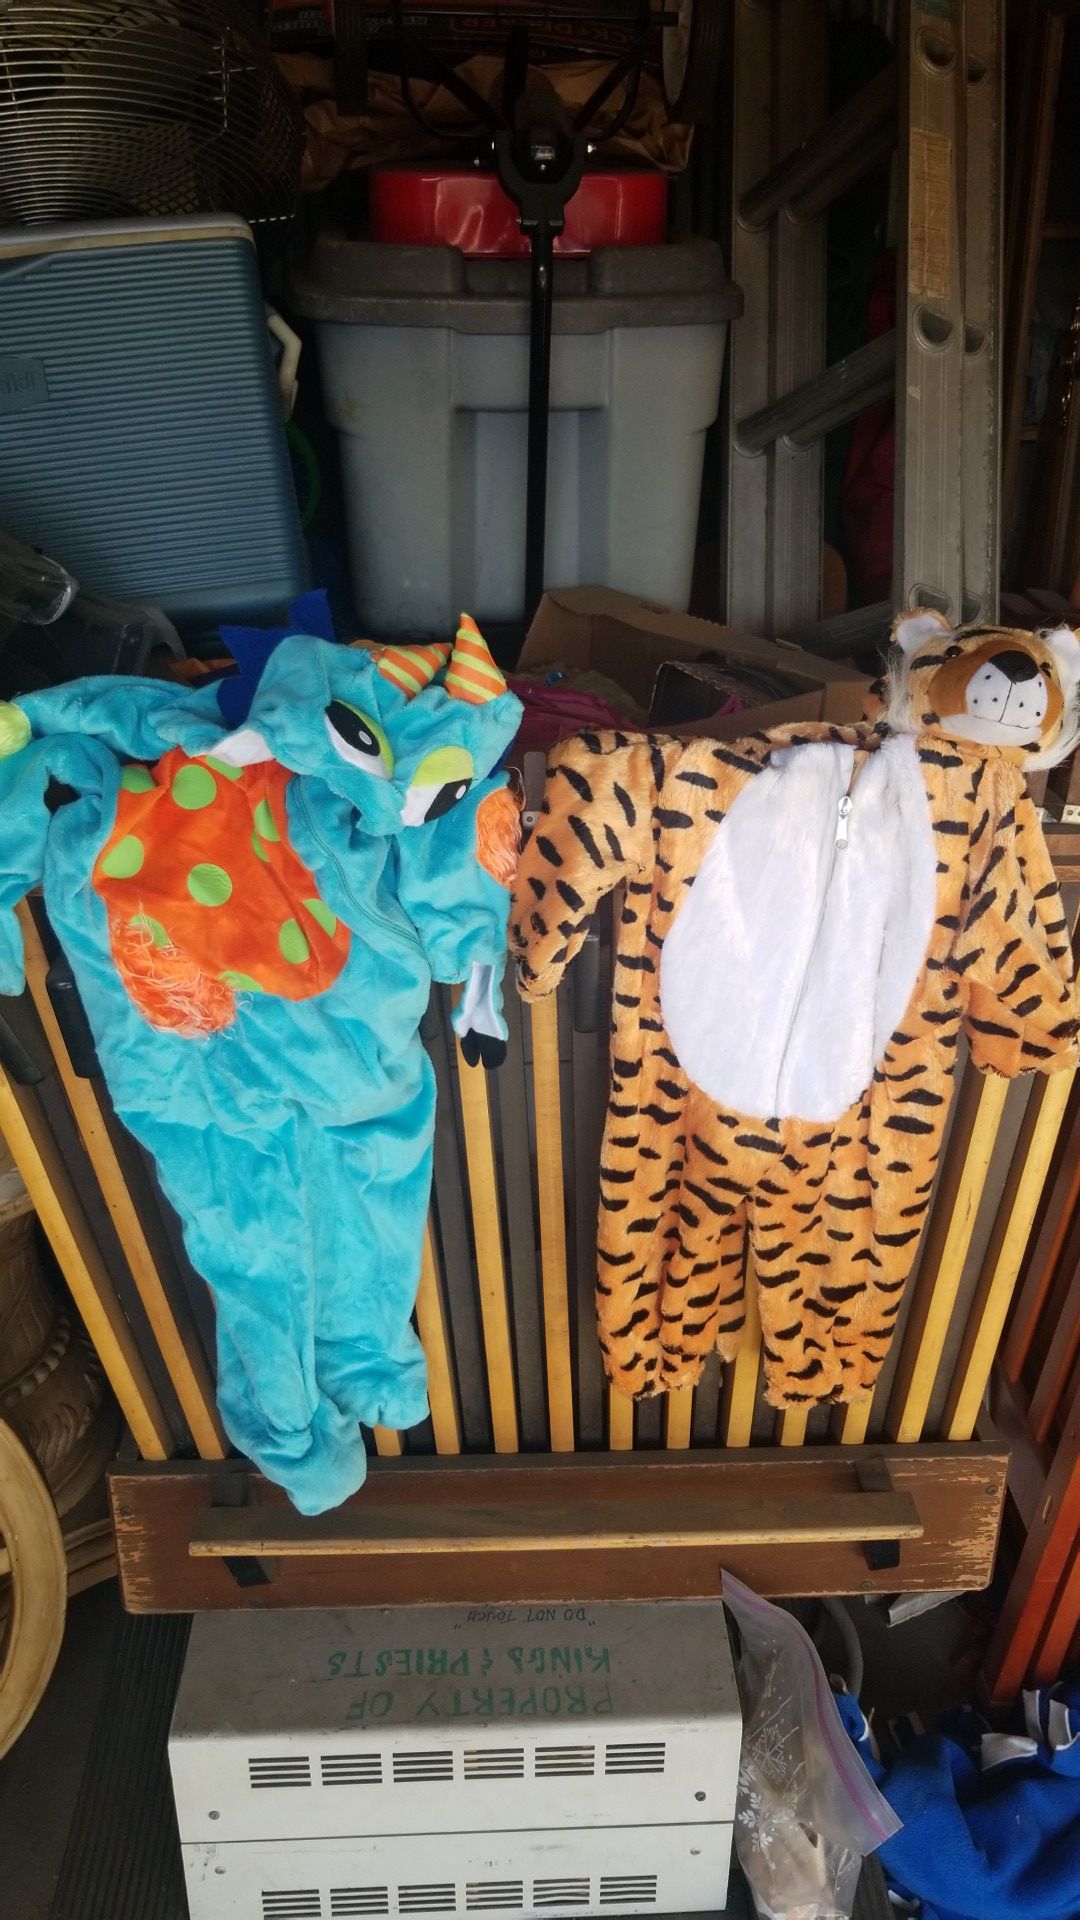 Toddler costumes